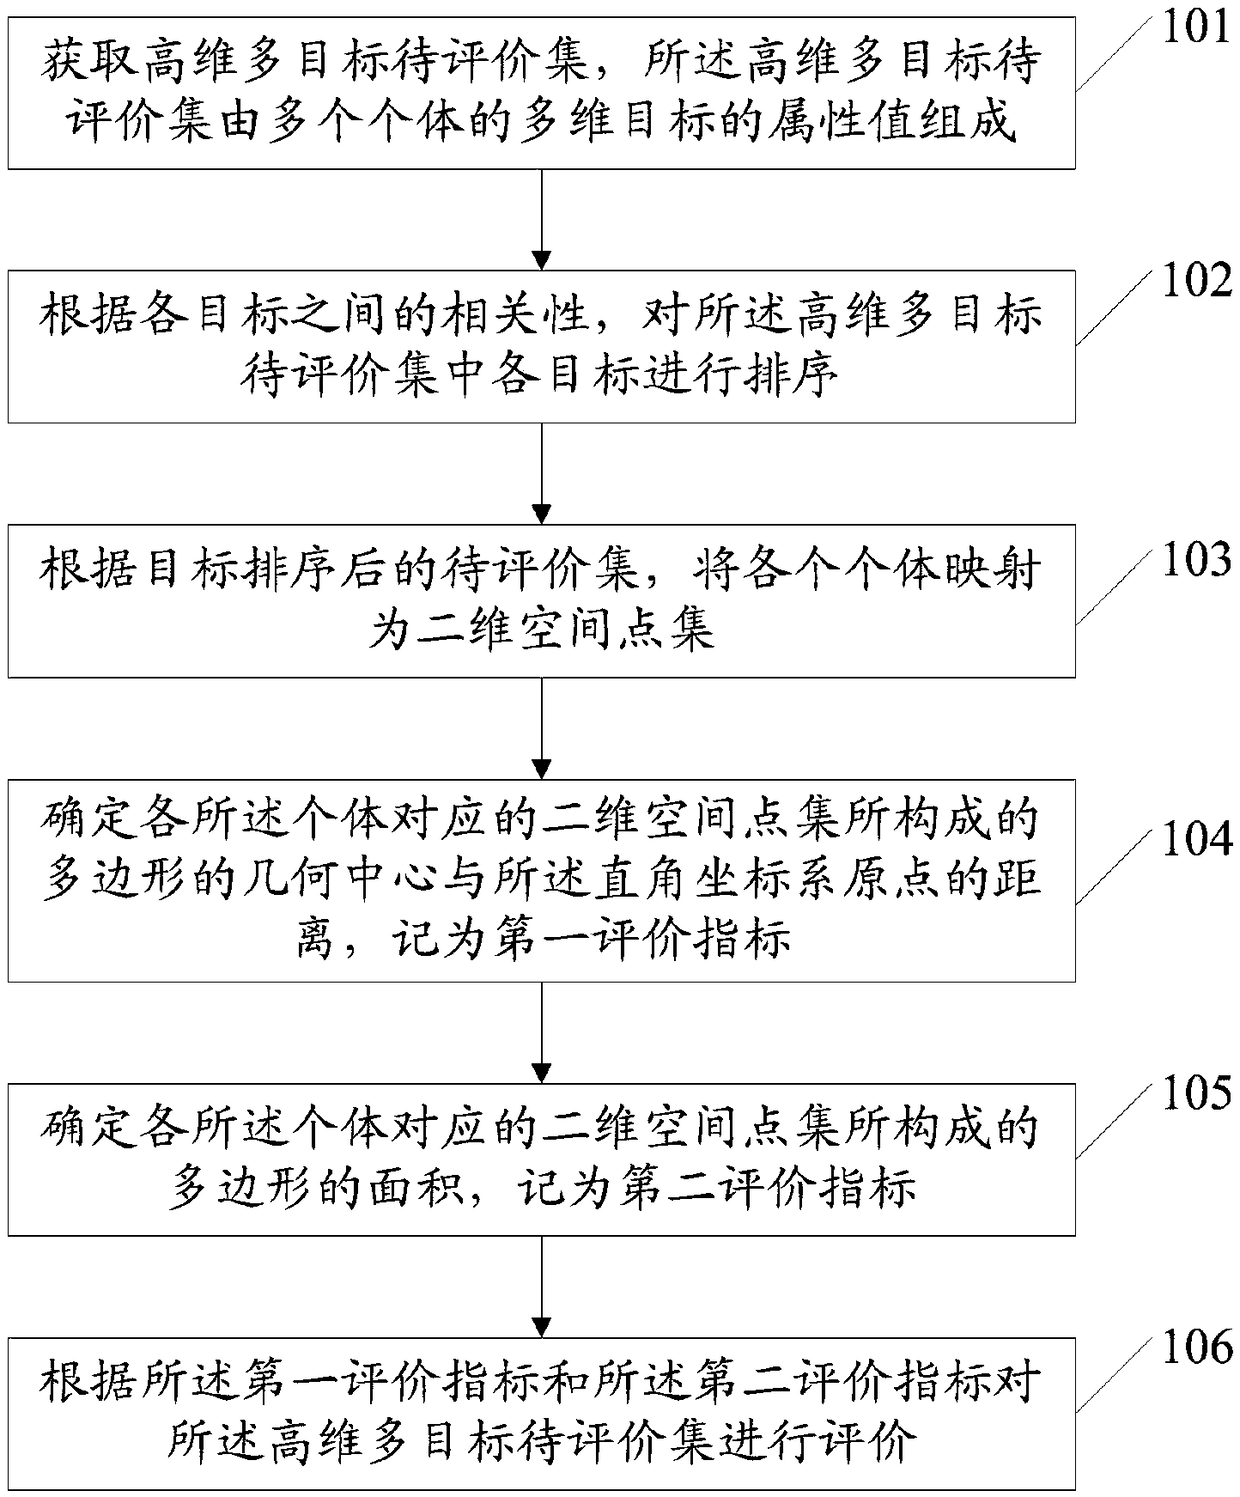 High-dimensional multi-objective evaluation method and system